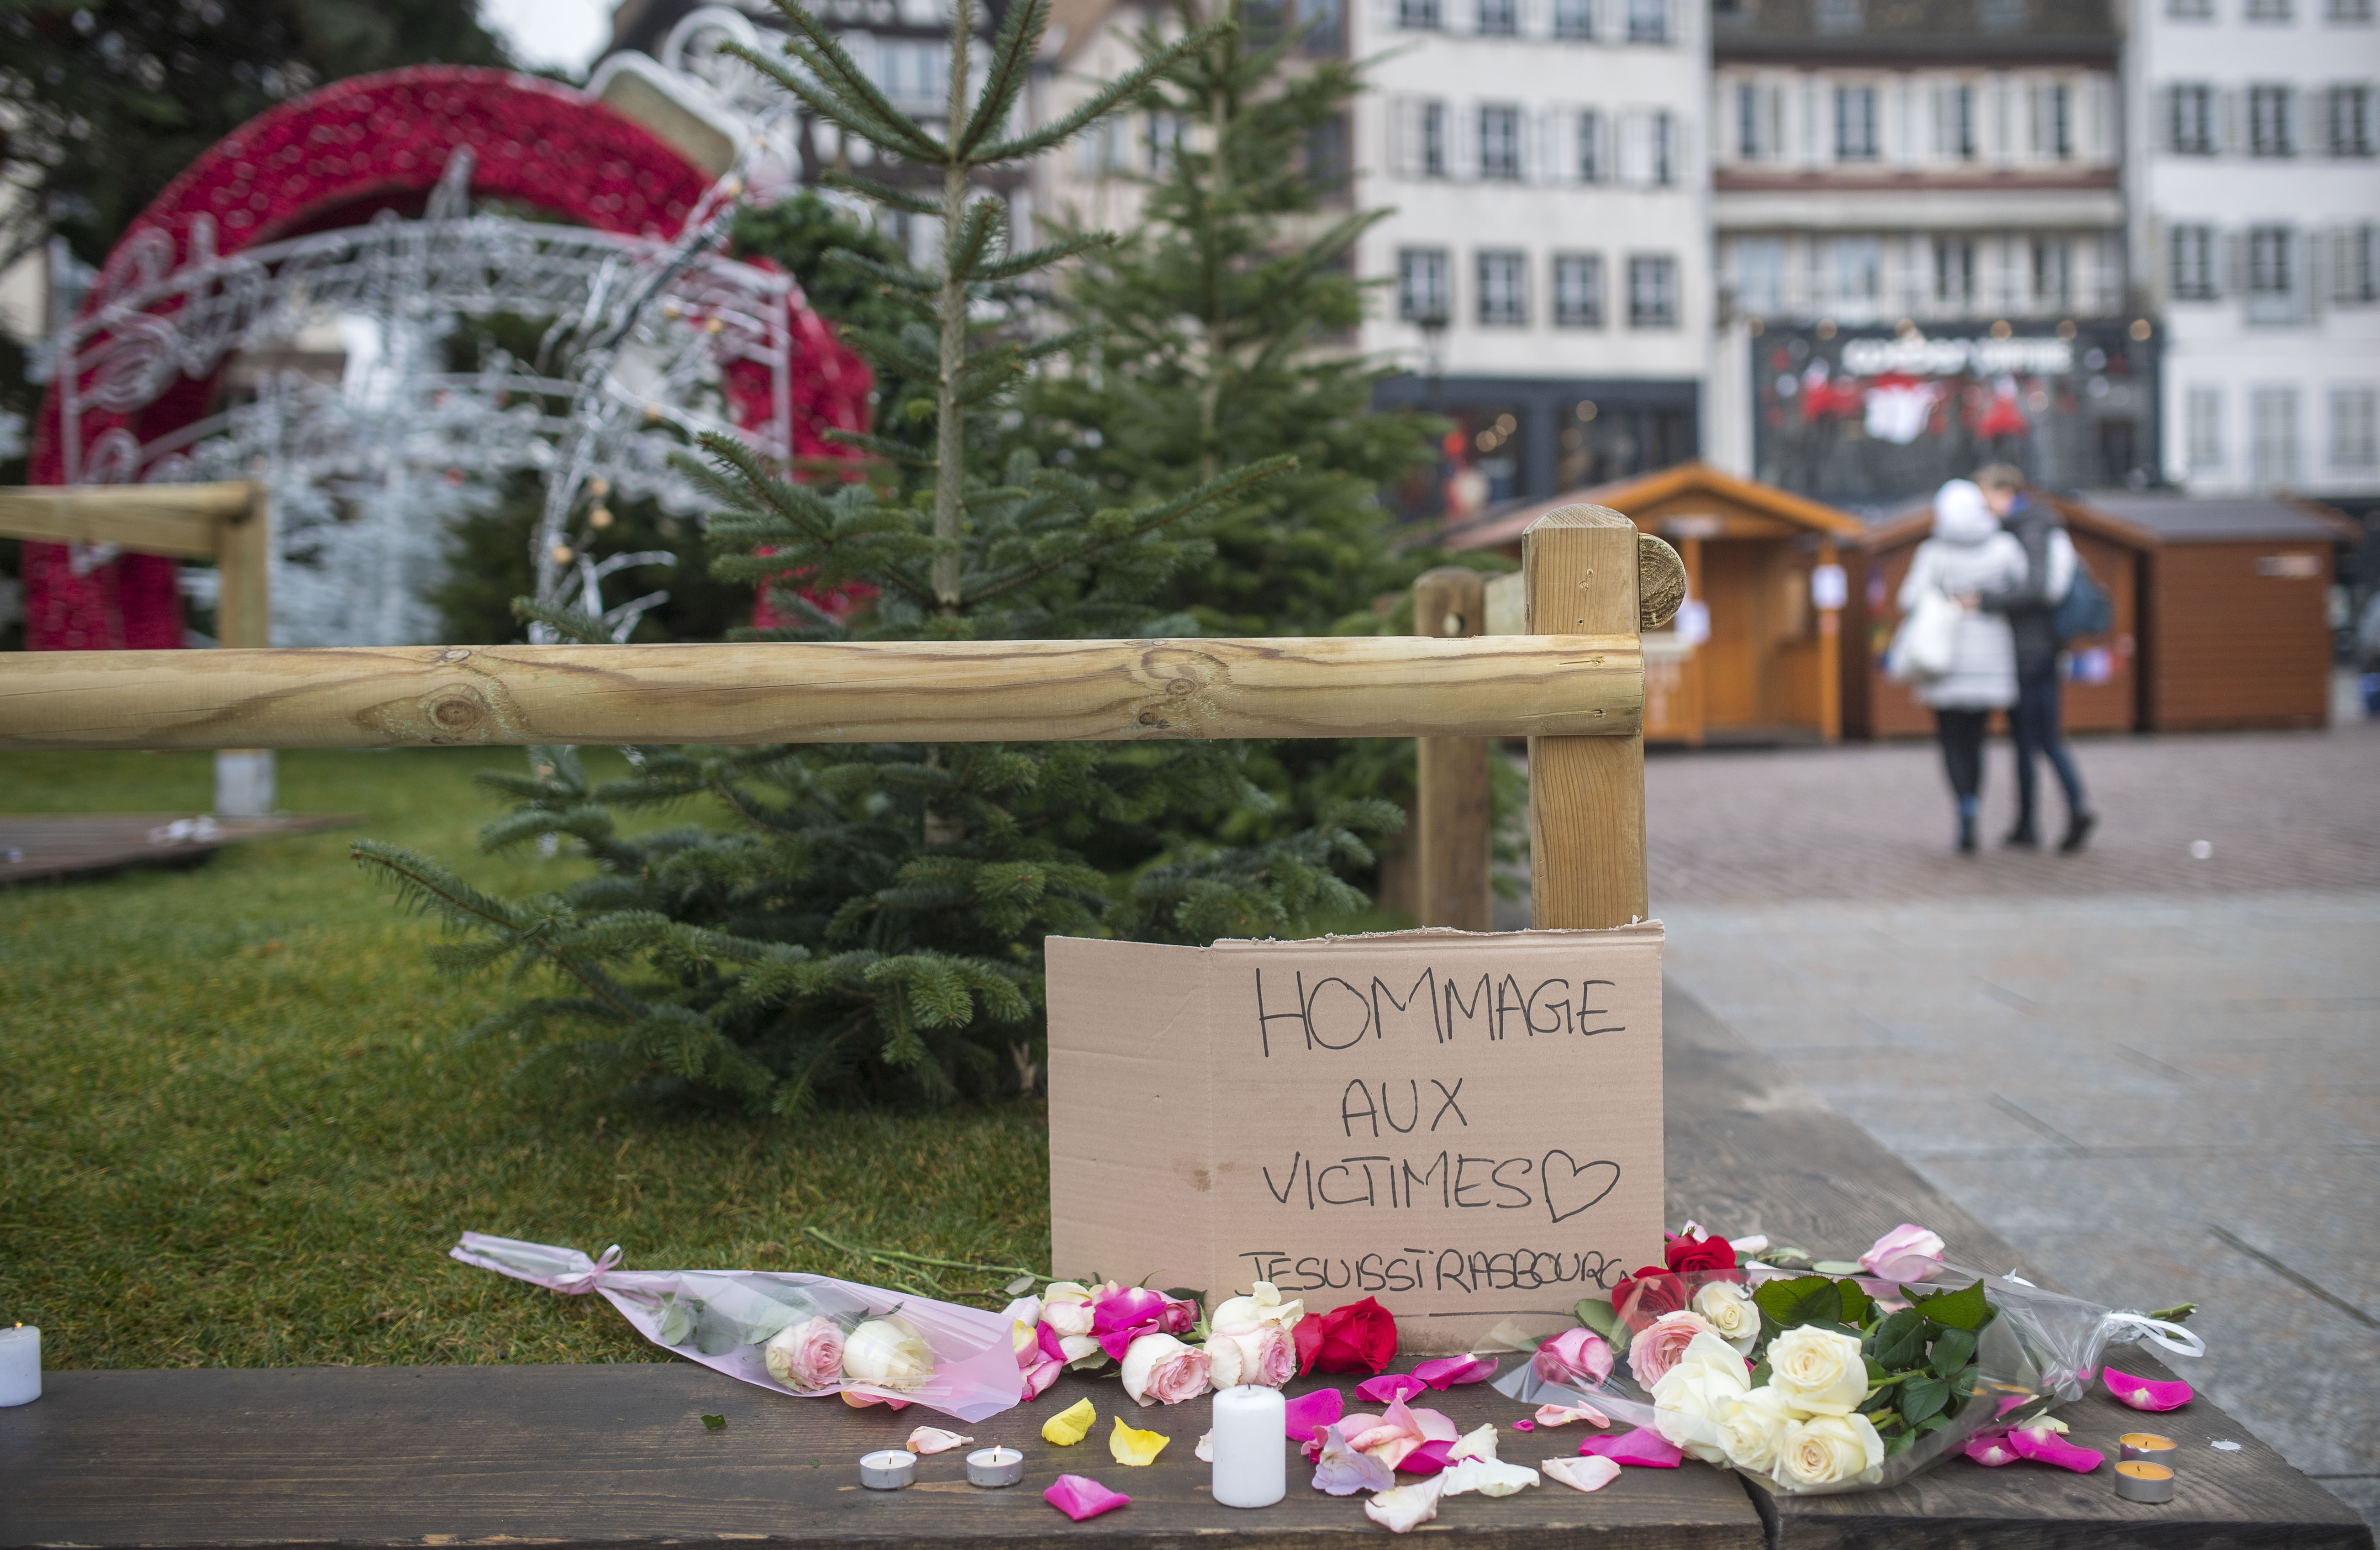 STRASBOURG, FRANCE - DECEMBER 12: Flowers, candles and a sign 'Hommage aux Victimes' pictured at the Christmas market where the day before a man shot 14 people, killing at least three, on December 12, 2018 in Strasbourg, France. Police have identified the man as Cherif Chekatt, a French citizen on a police terror watch-list. Chekatt exchanged gunfire with soldiers after the attack, is reportedly injured and is still on the loose. (Photo by Thomas Lohnes/Getty Images)